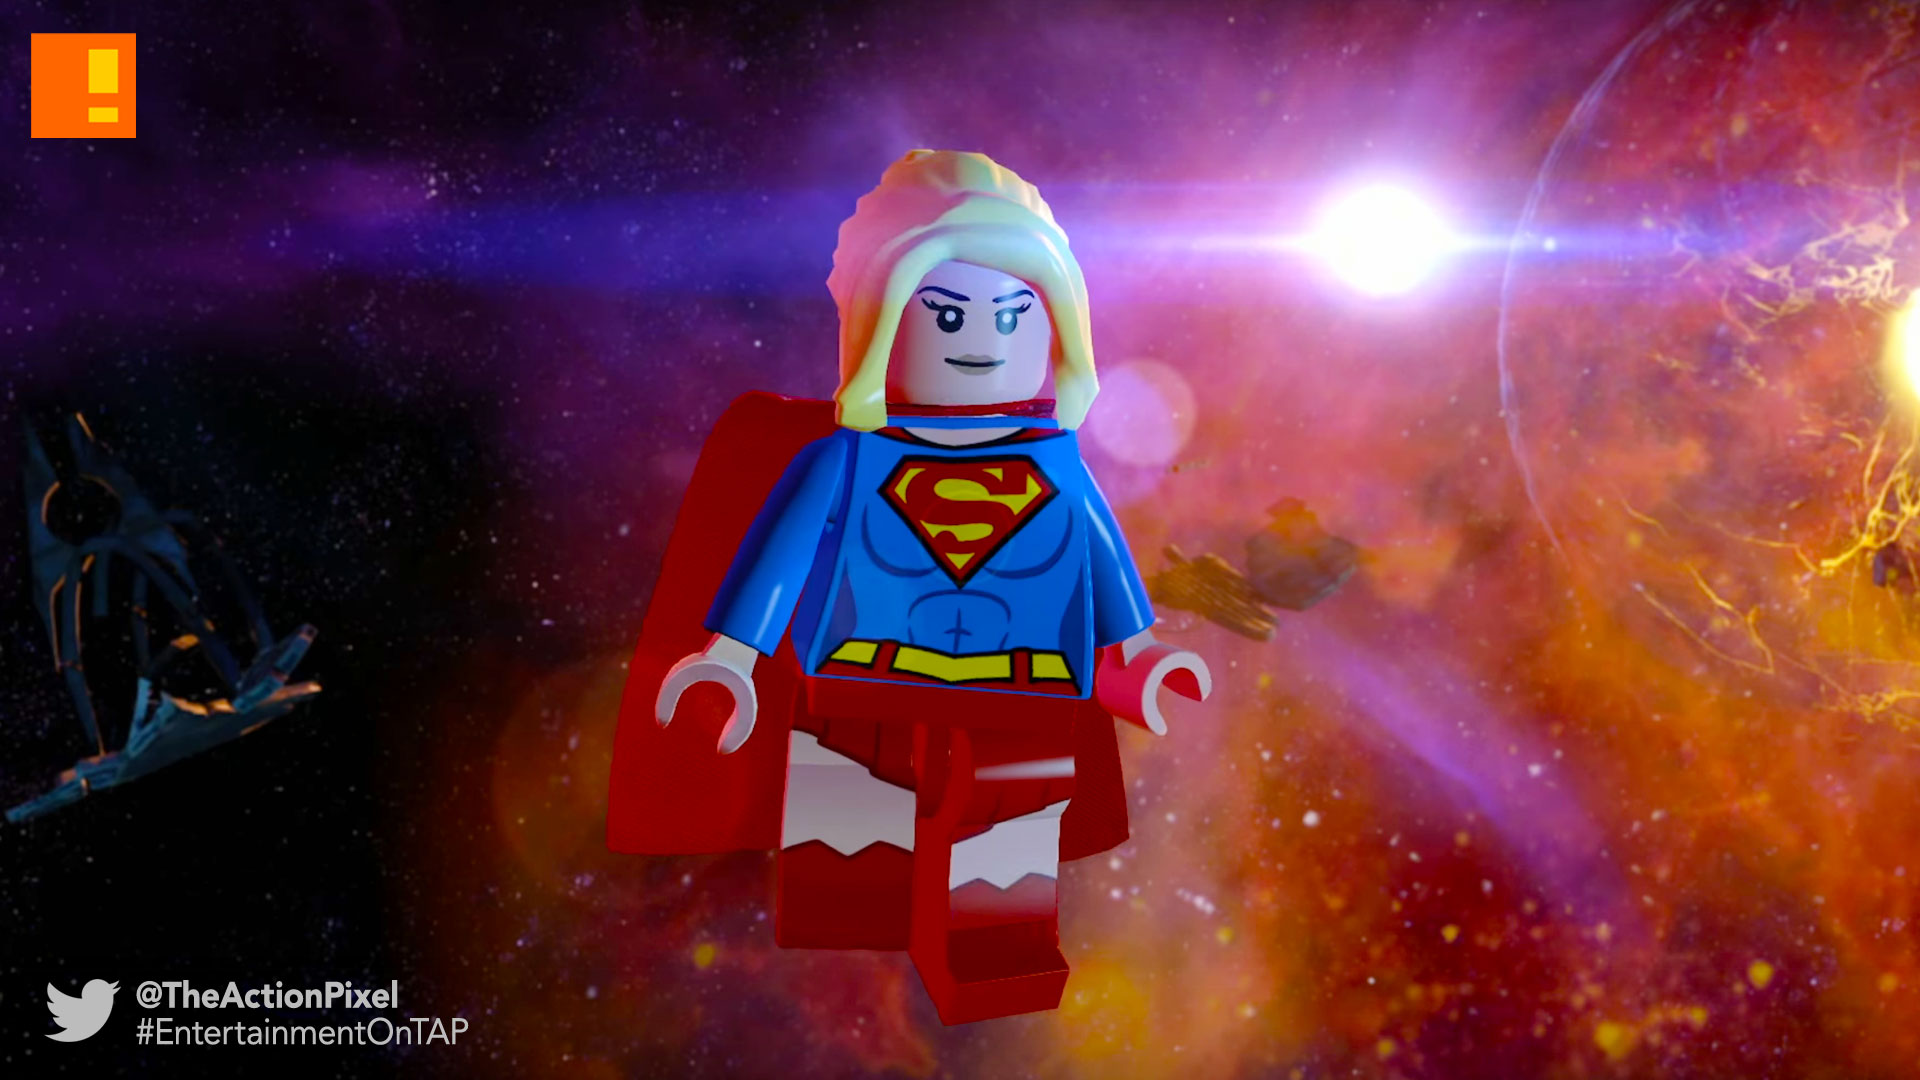 supergirl, lego dimensions, wb games, the action pixel, entertainment on tap,